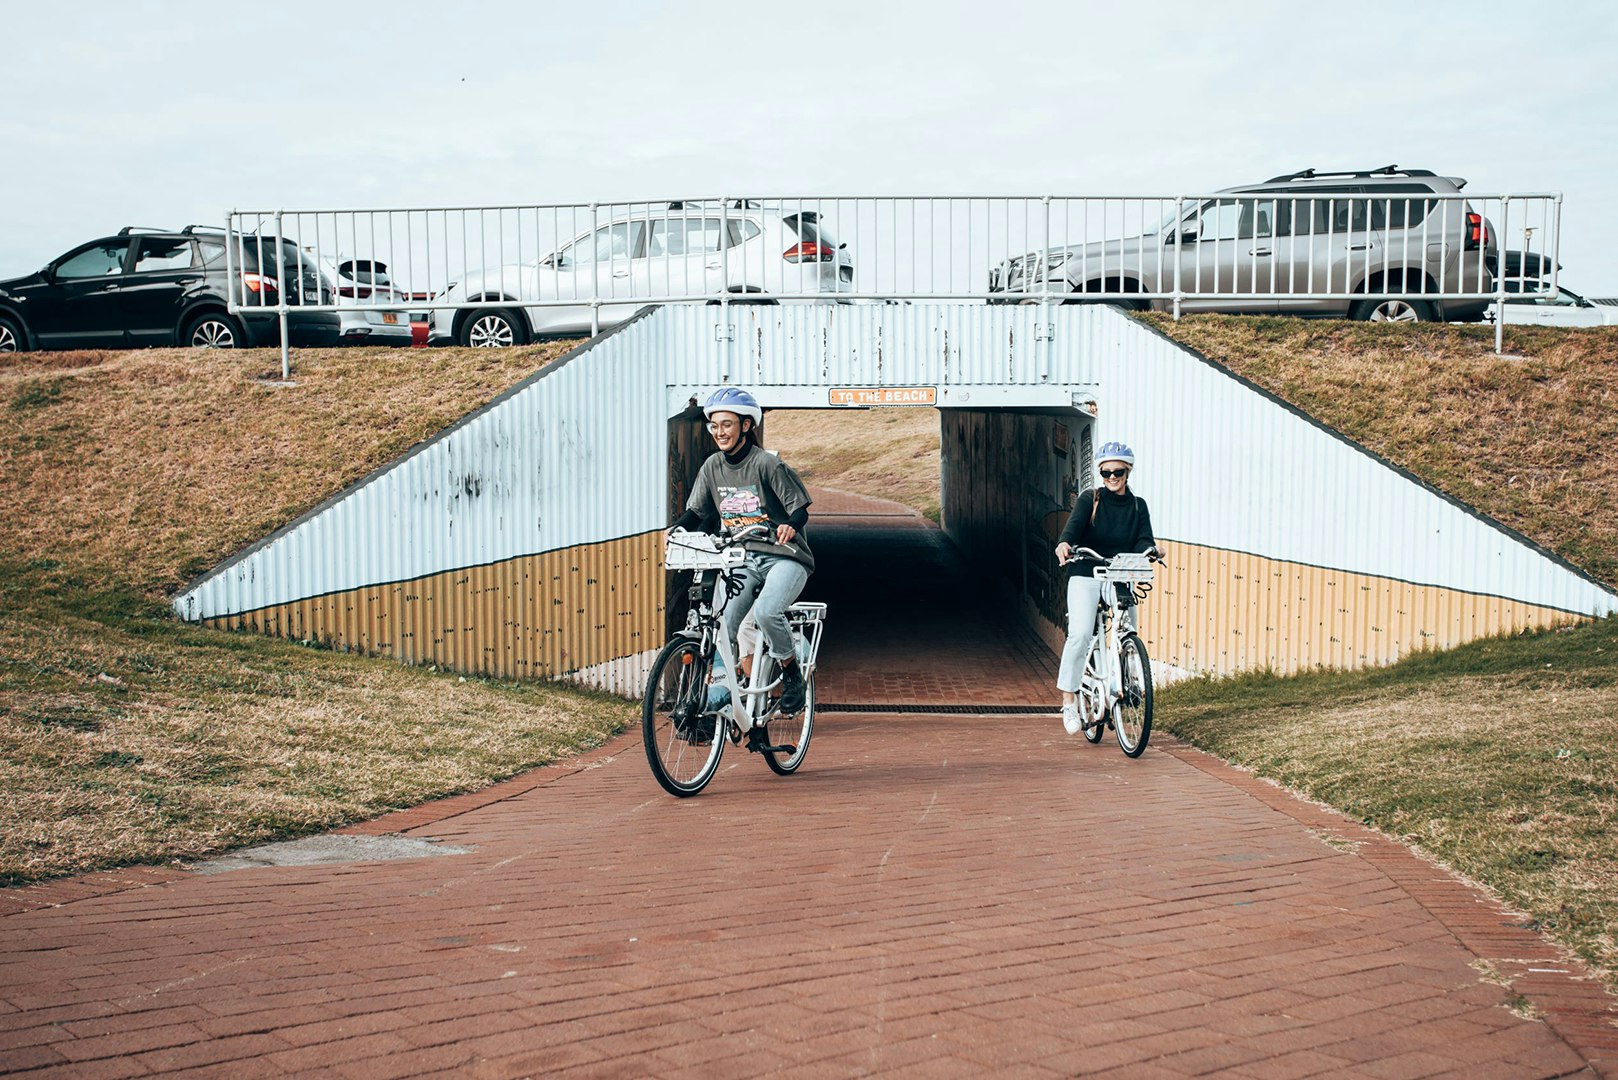 Recreational cyclists riding on path